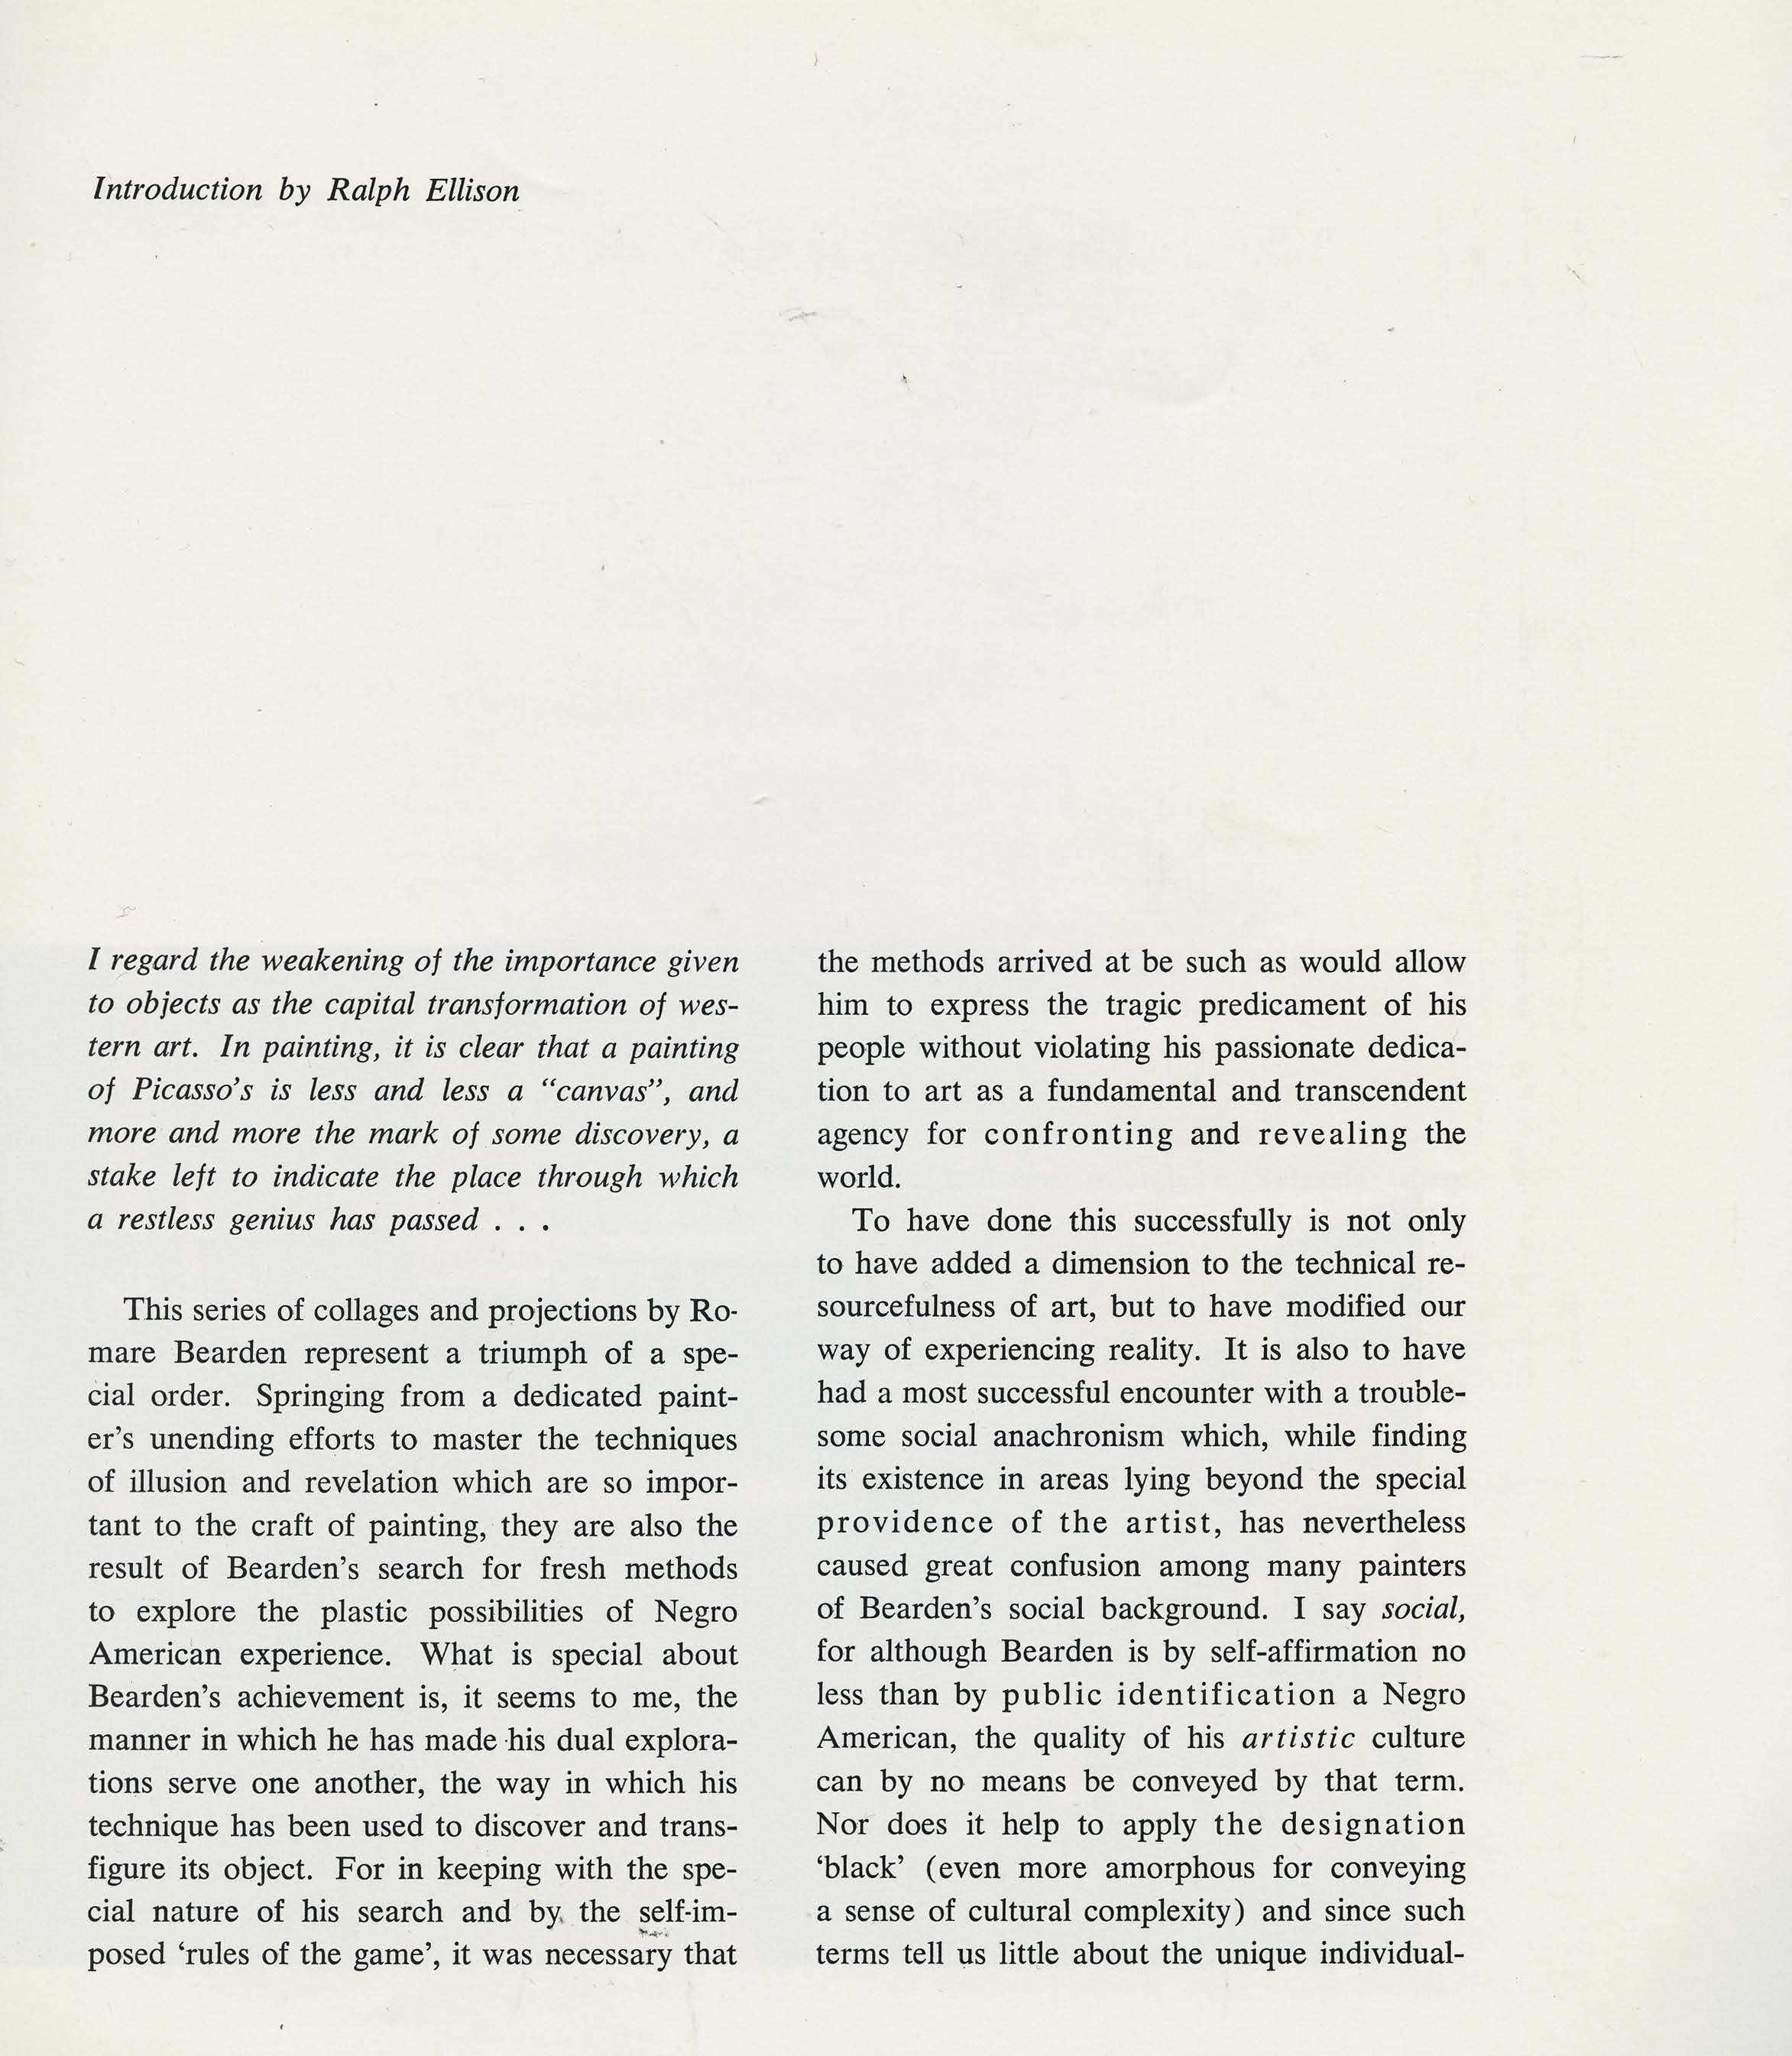 Scan of the cataolog 'Romare Bearden, Paintings and Projects' 